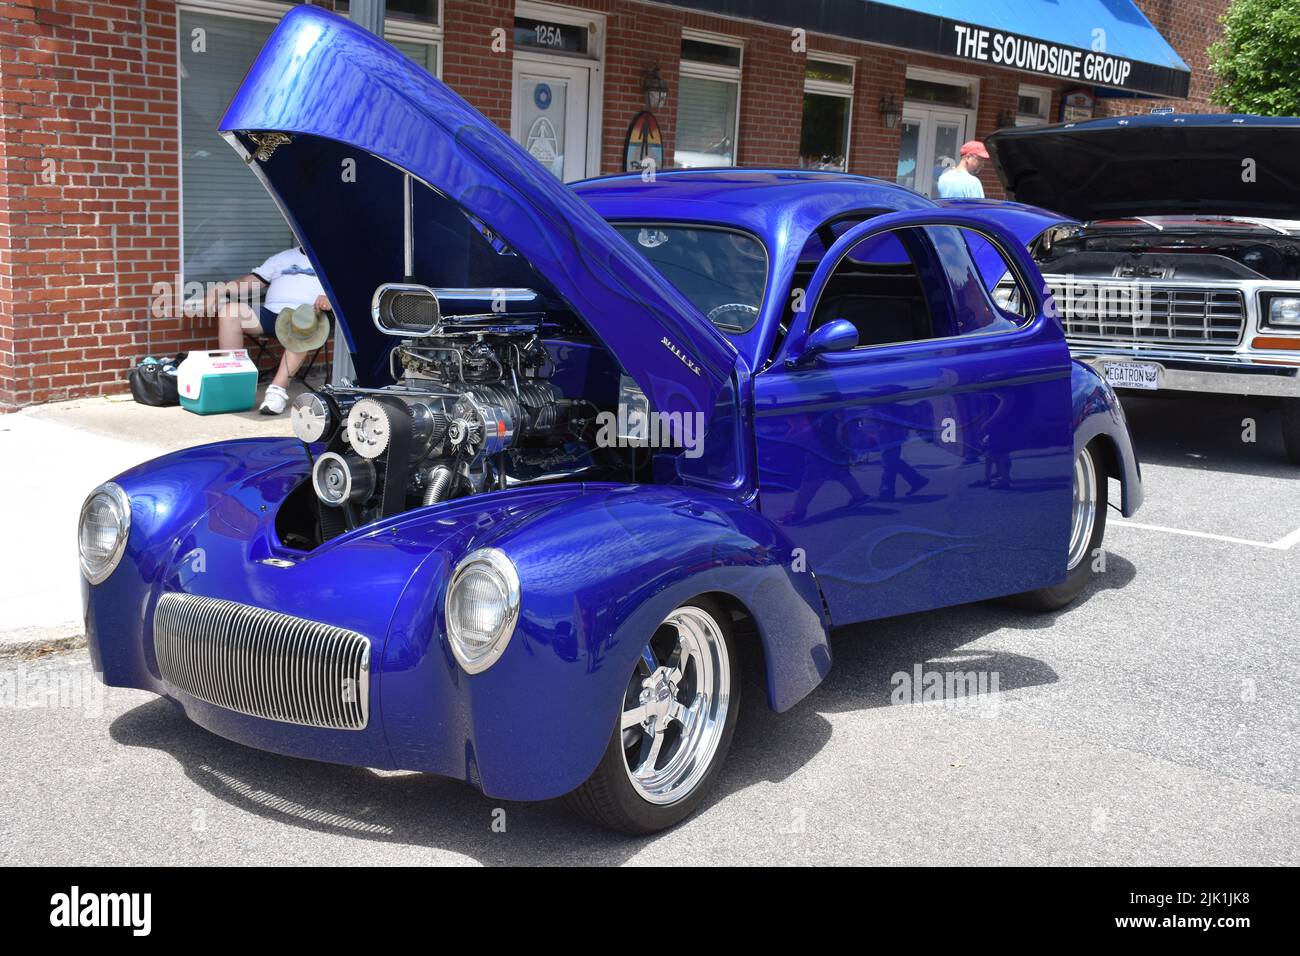 A Vintage Willys Restomod with a 454 Supercharged Engine on display at a car show. Stock Photo